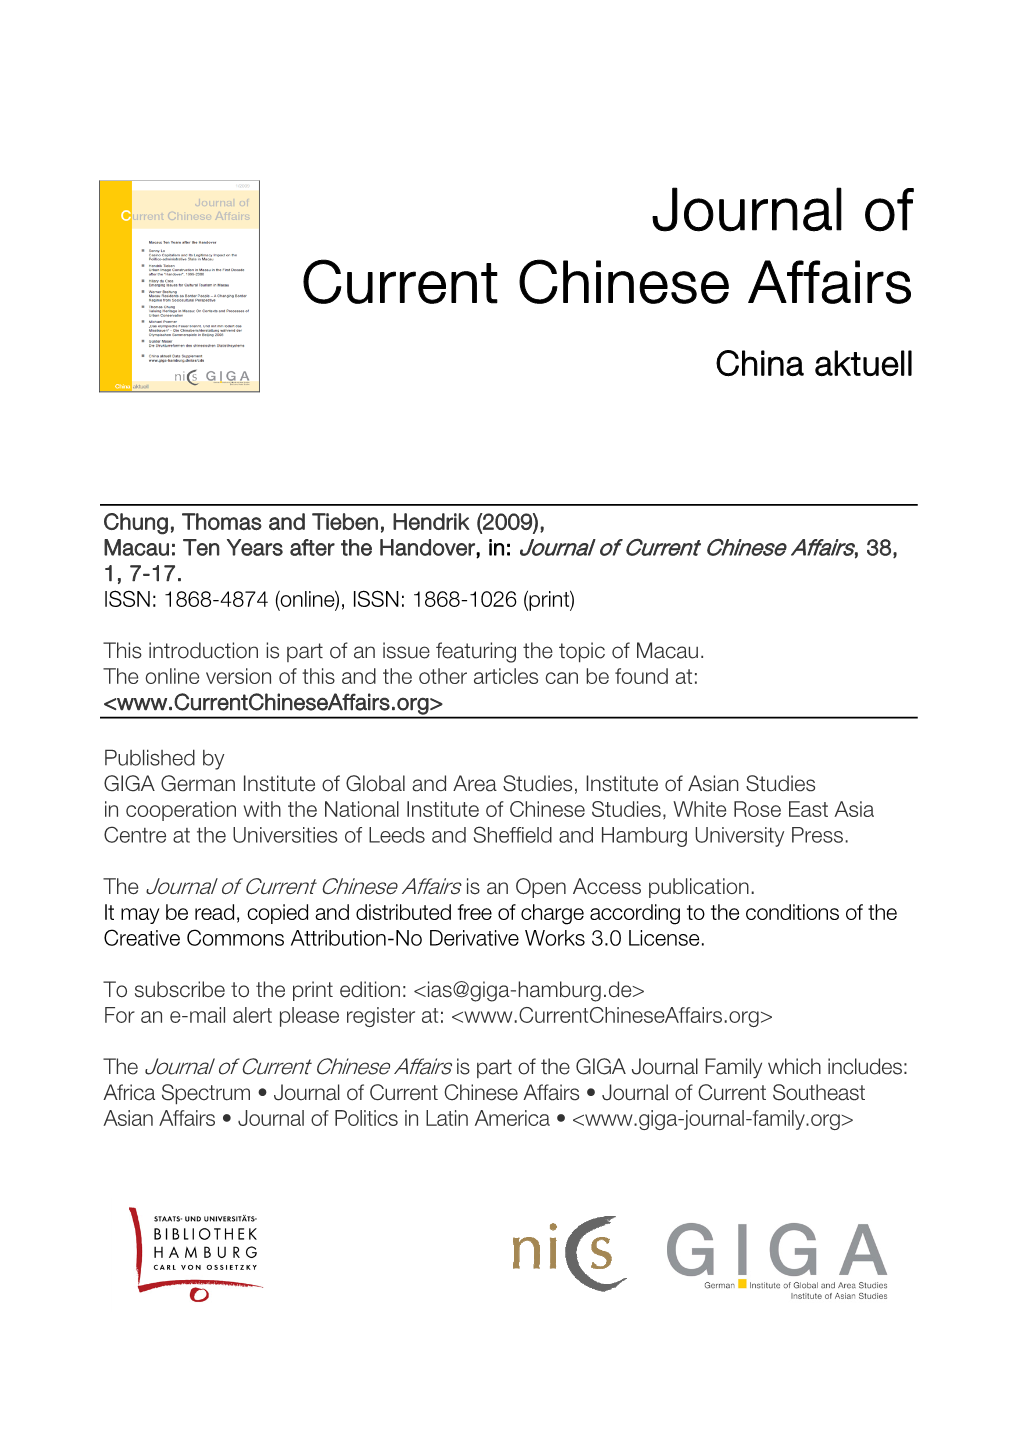 Macau: Ten Years After the Handover, In: Journal of Current Chinese Affairs, 38, 1, 7-17